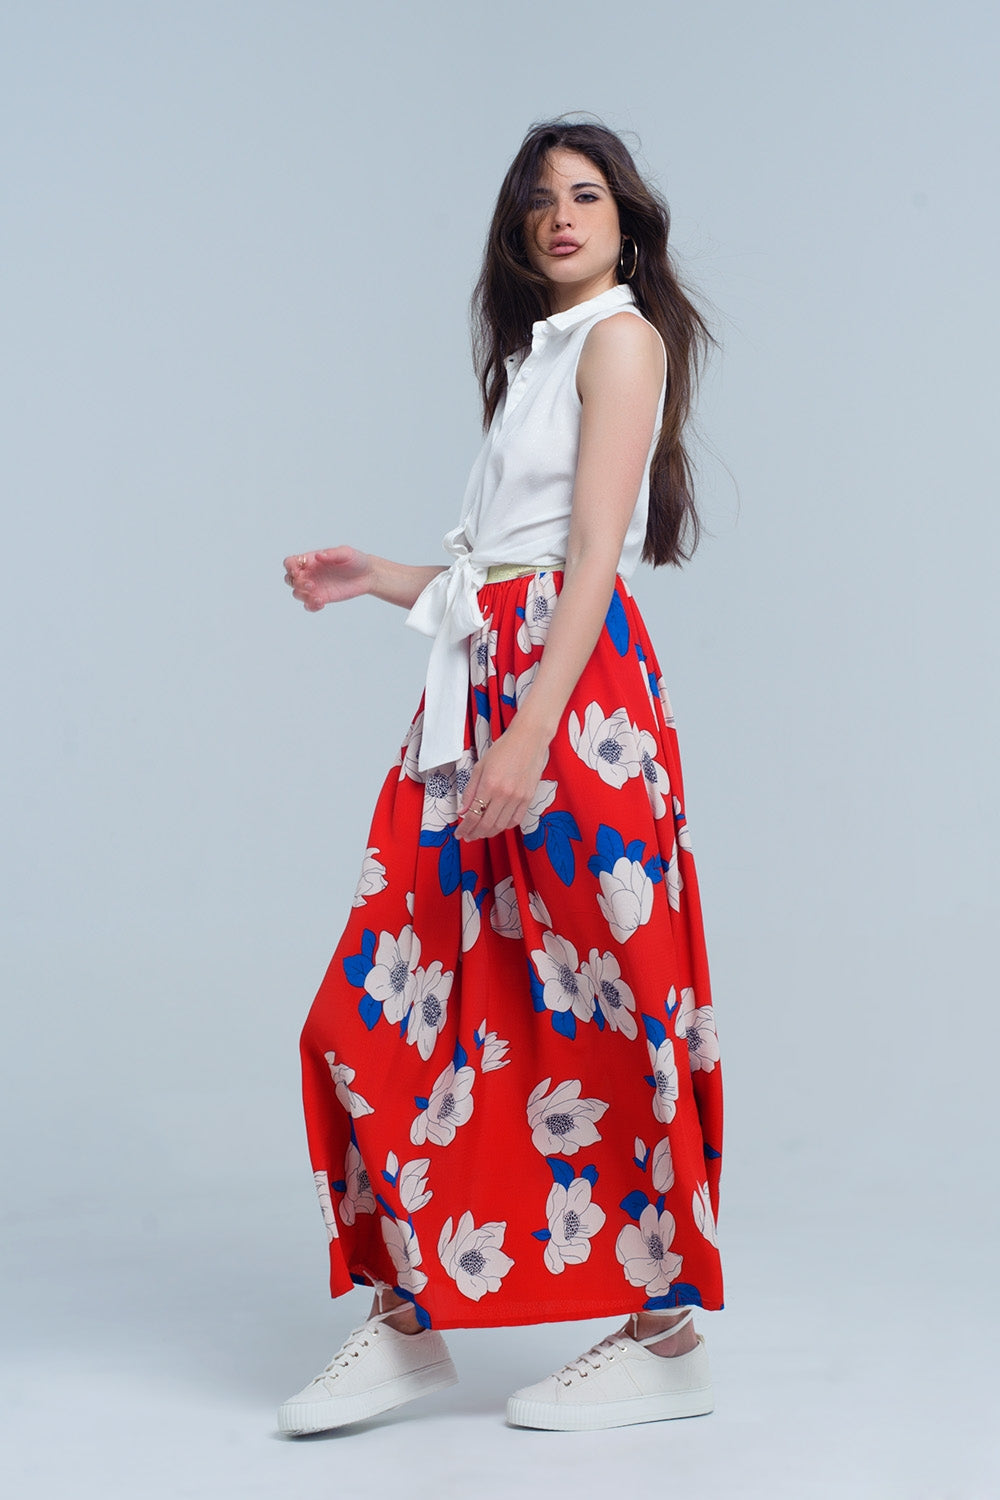 Red long skirt with printed flowers - Szua Store